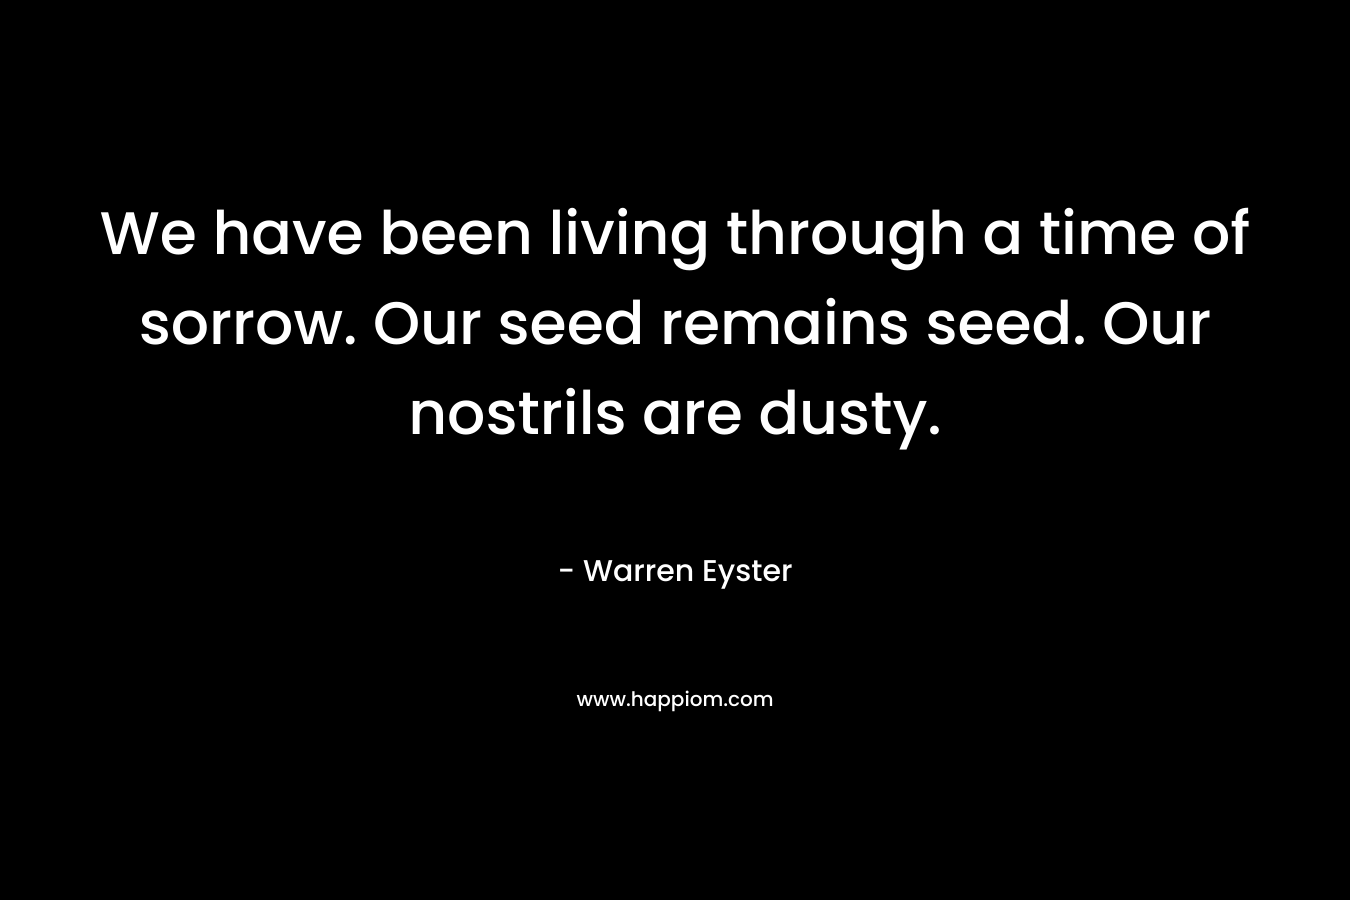 We have been living through a time of sorrow. Our seed remains seed. Our nostrils are dusty. – Warren Eyster